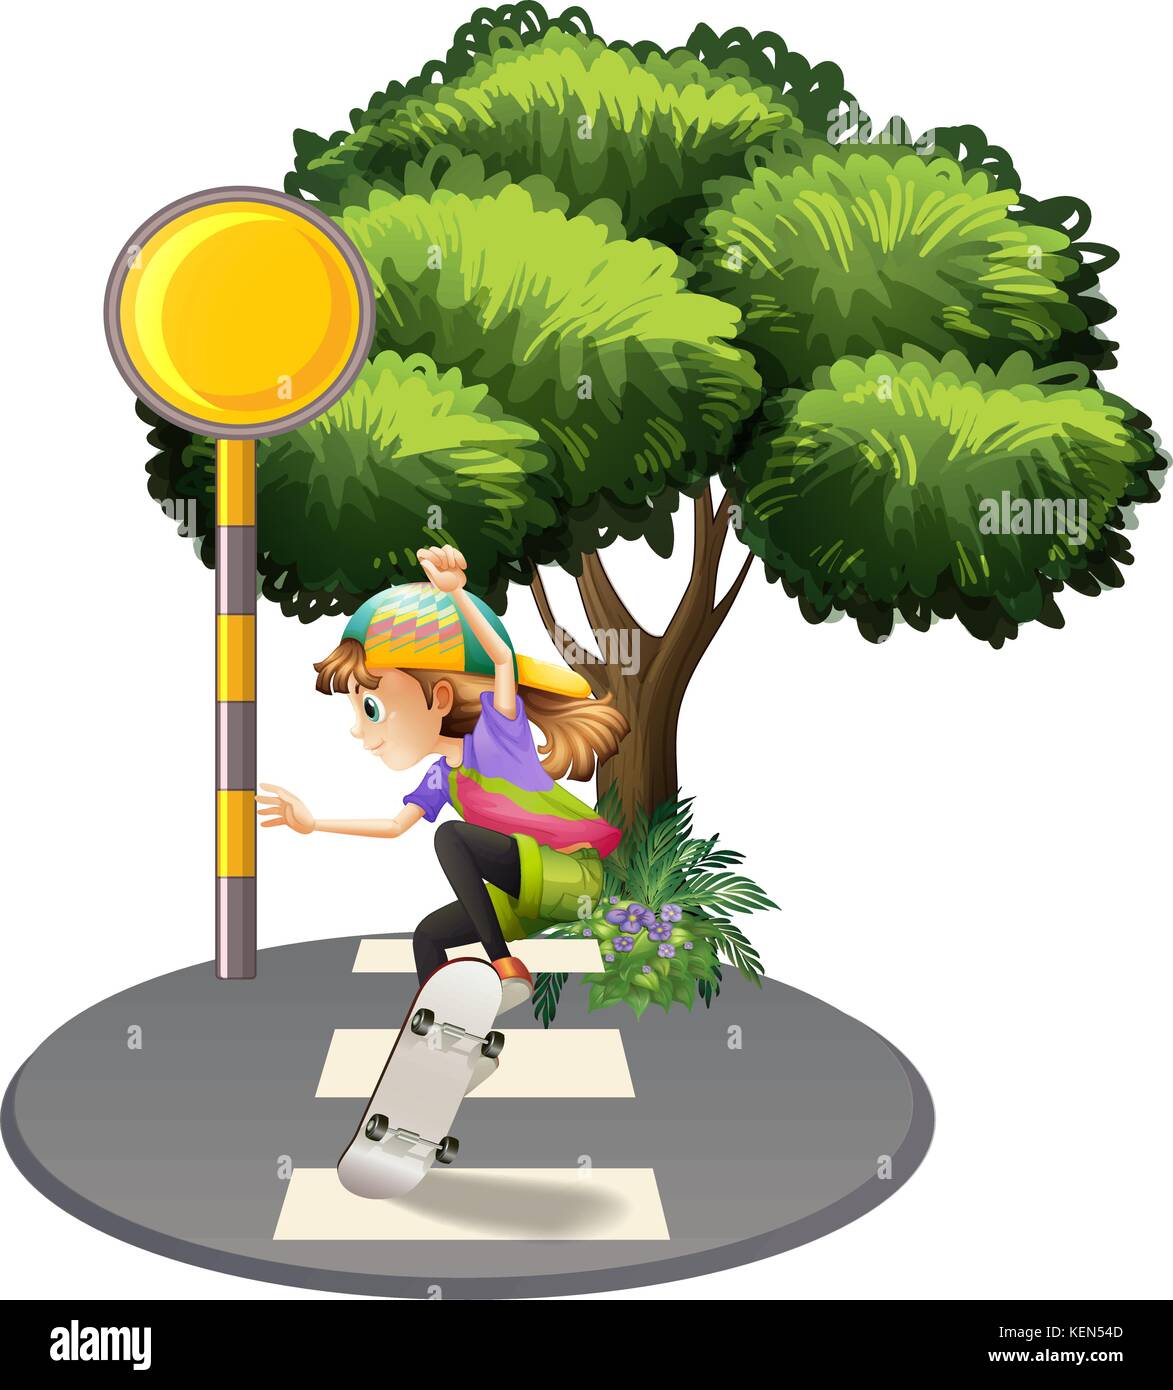 Illustration of a young girl playing with her skateboard at the street on a white background Stock Vector